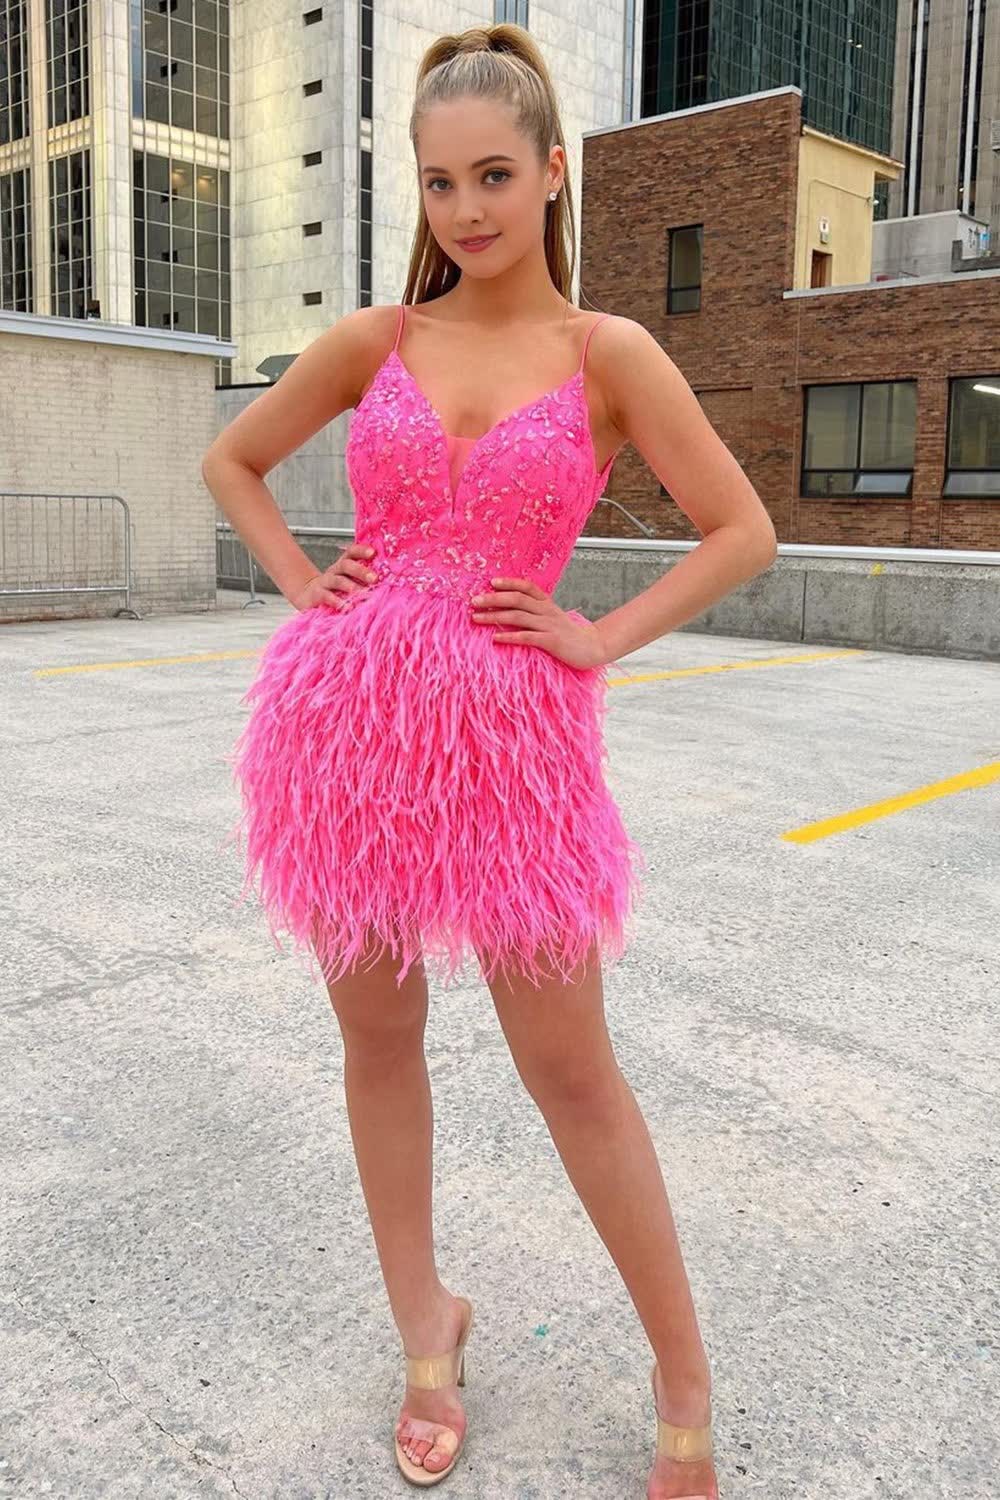 Pink Sequins Tight Corset Homecoming Dress with Feathers outfit, Pink Sequins Tight Homecoming Dress with Feathers